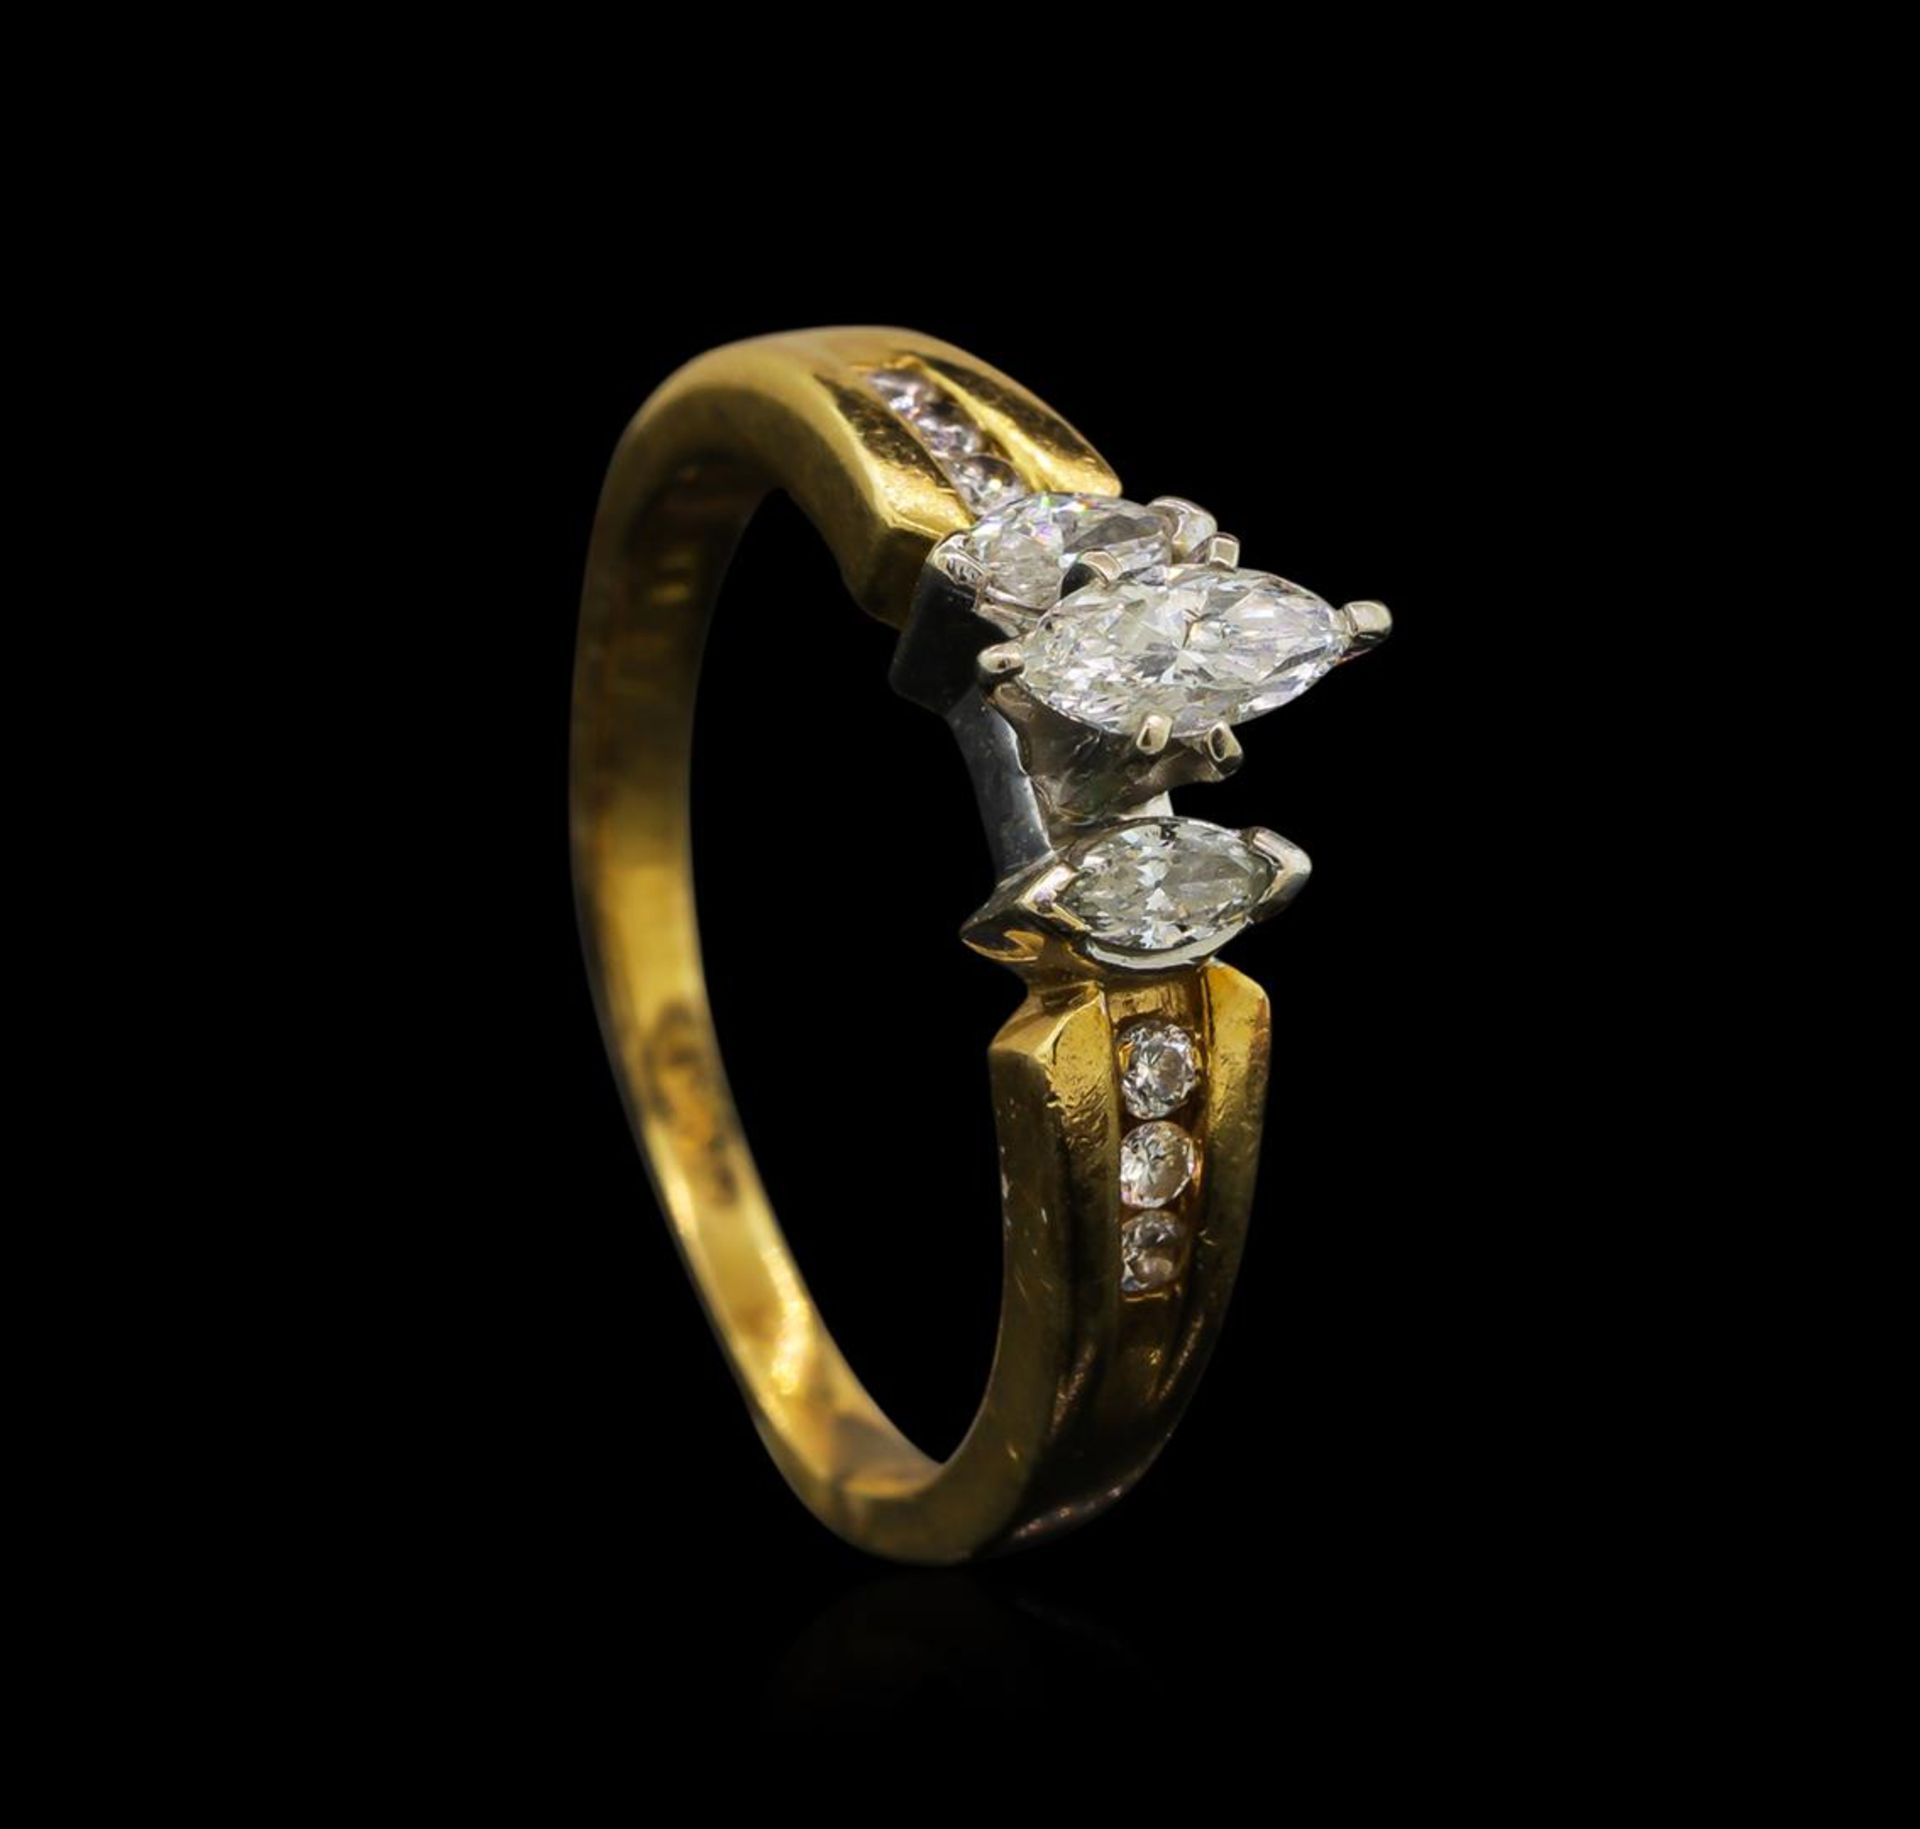 0.53 ctw Diamond Ring - 14KT Yellow and White Gold - Image 4 of 5